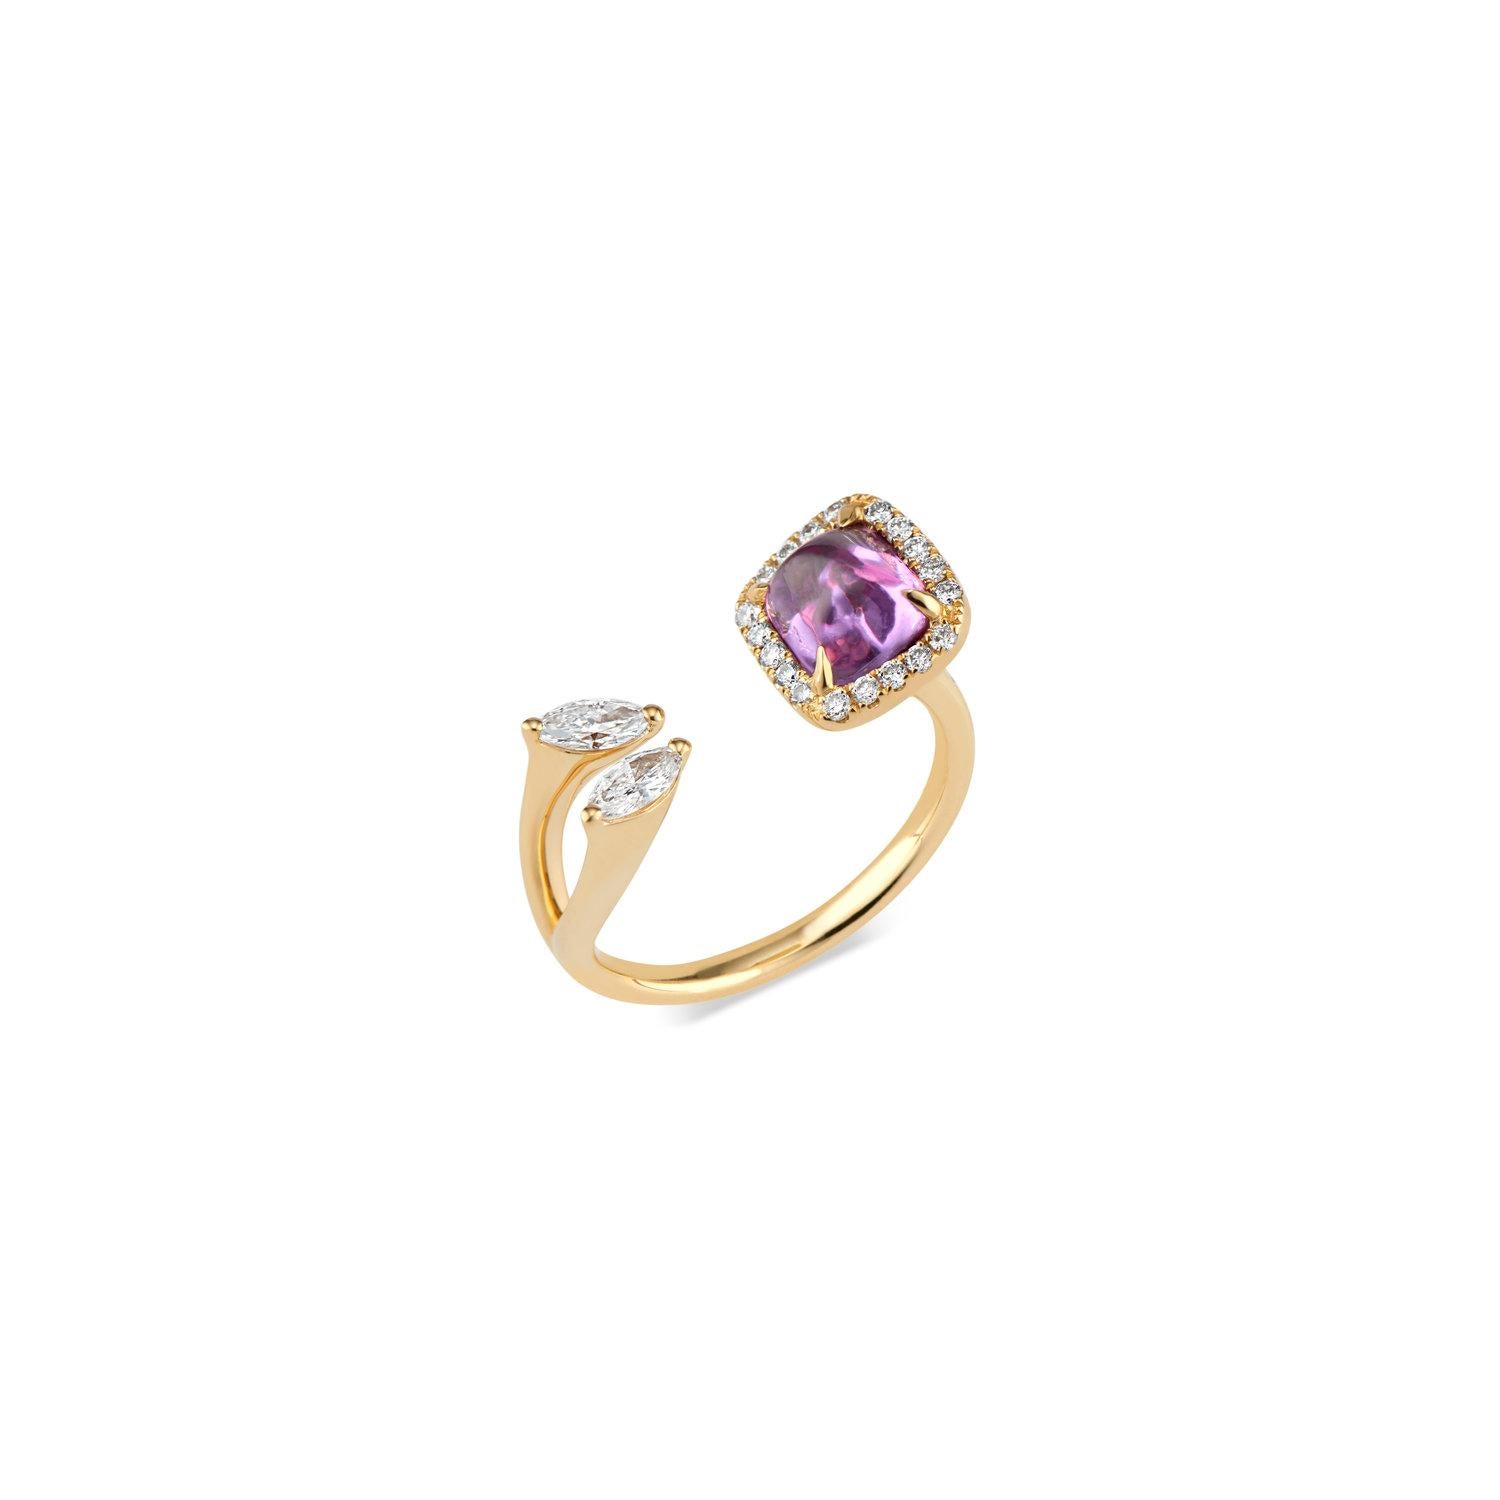 Abstract and artful, Ri Noor's Toi Moi Purple Pink Sapphire and Marquise Diamond Ring creates a dynamic contrast between organic forms and geometric shapes. The sinuous band of 18k yellow gold wraps around the wearer's finger, presenting a natural